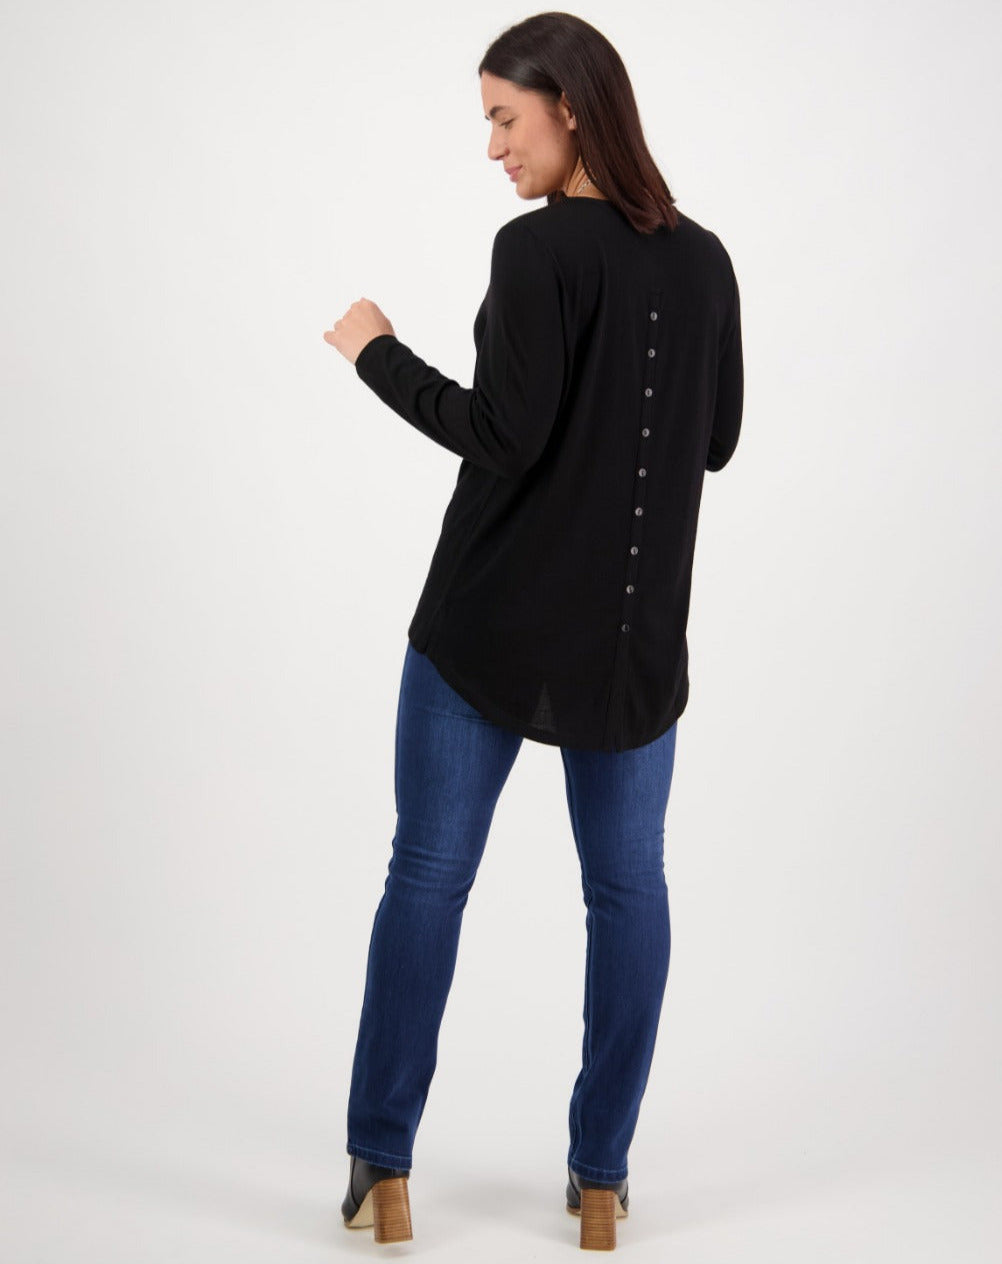 MERINO LONG SLEEVE TOP WITH BACK BUTTON PLACKET